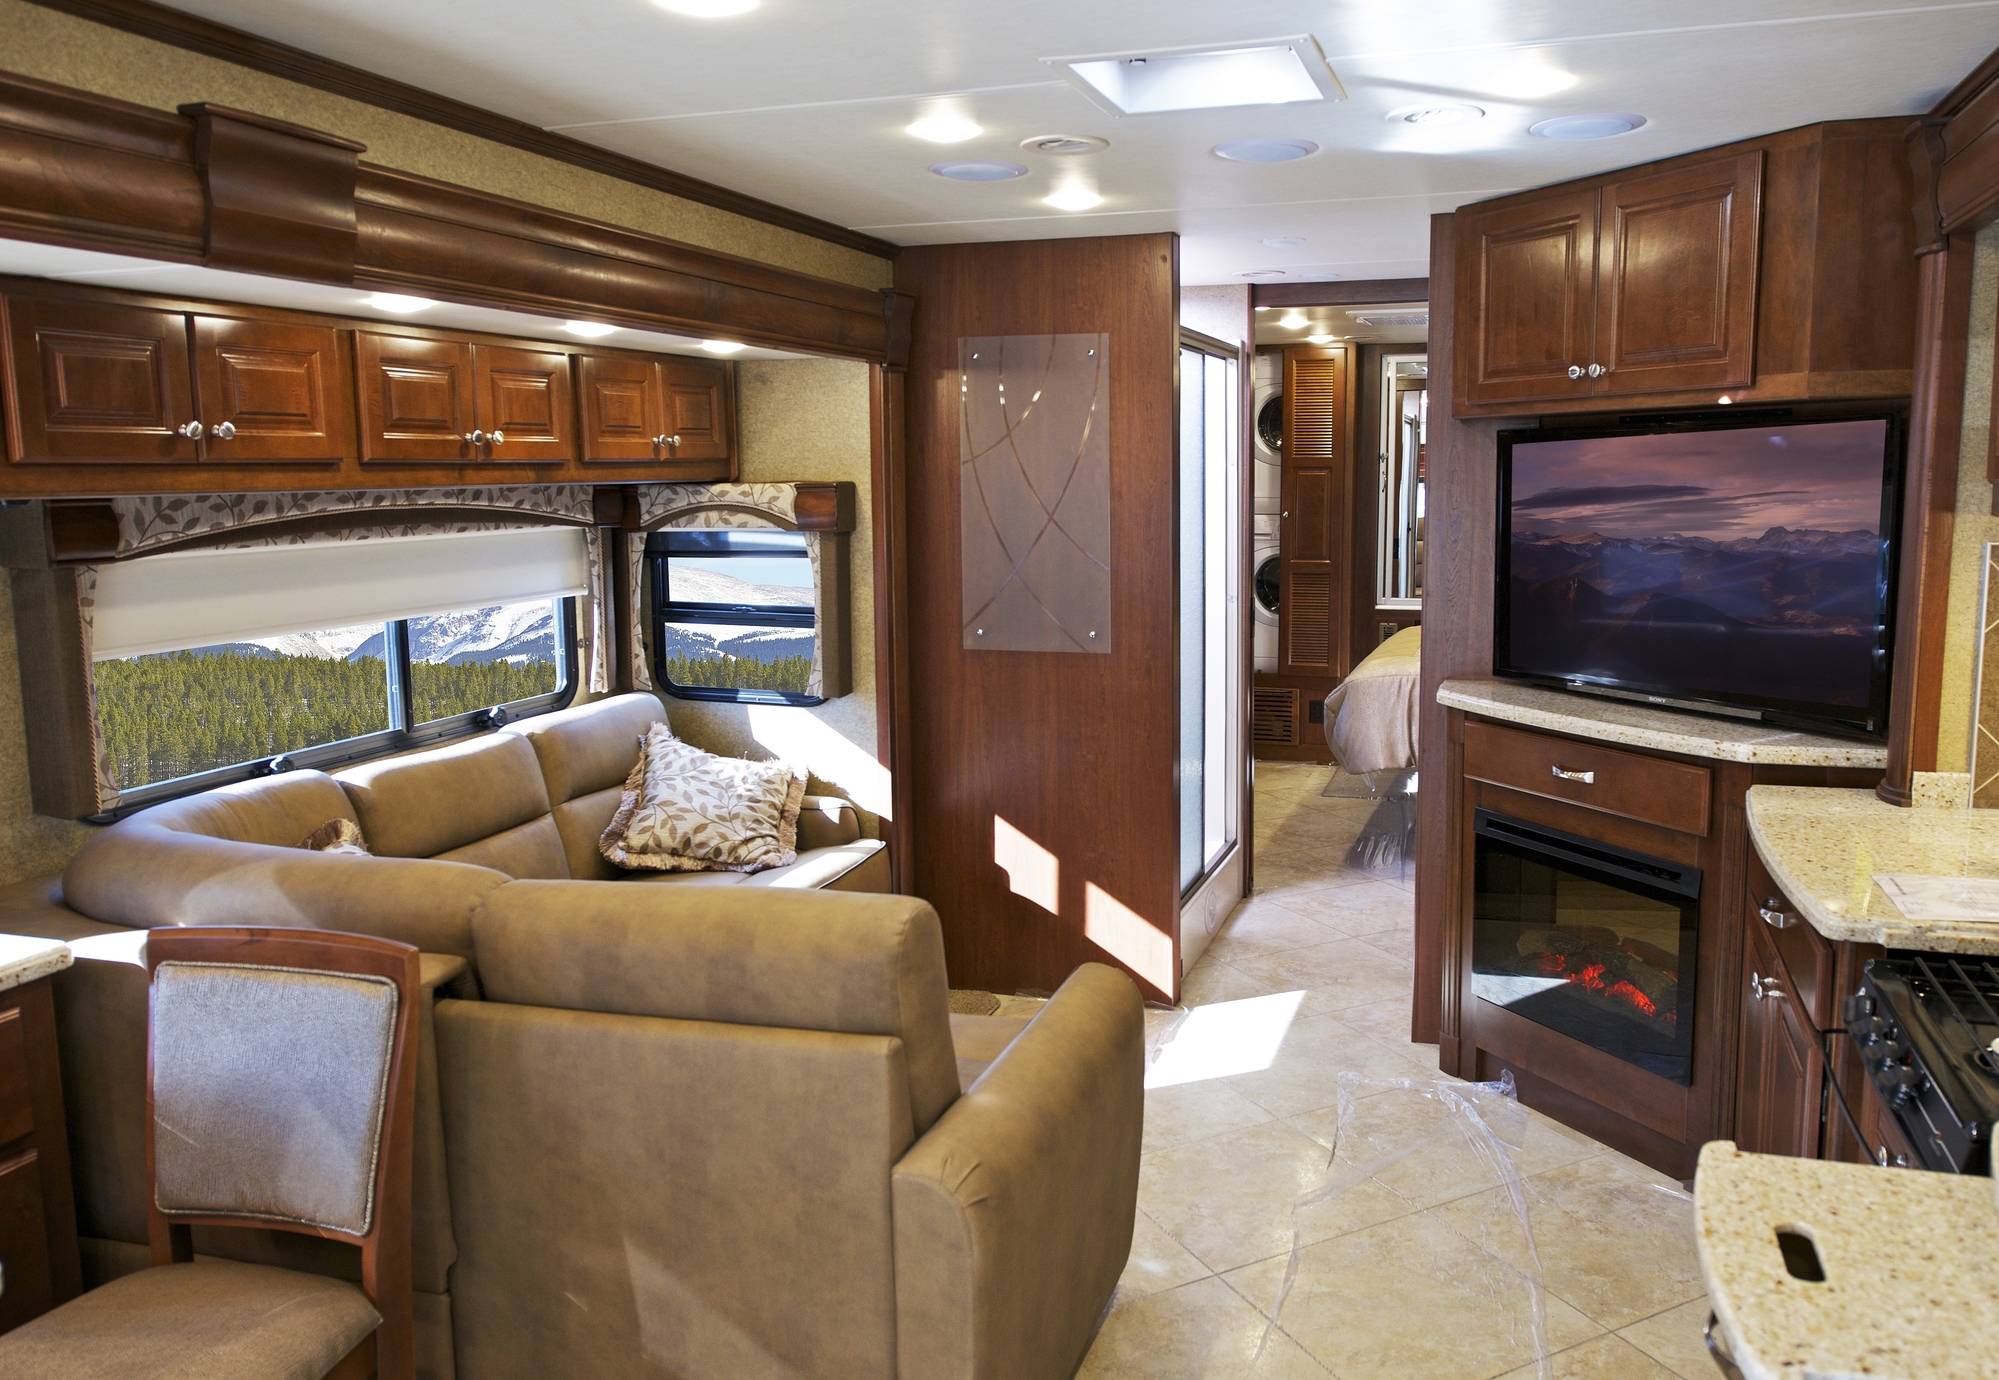 Modern RV Interior. Class A Spacious and Luxury Interior with Large LED Television.